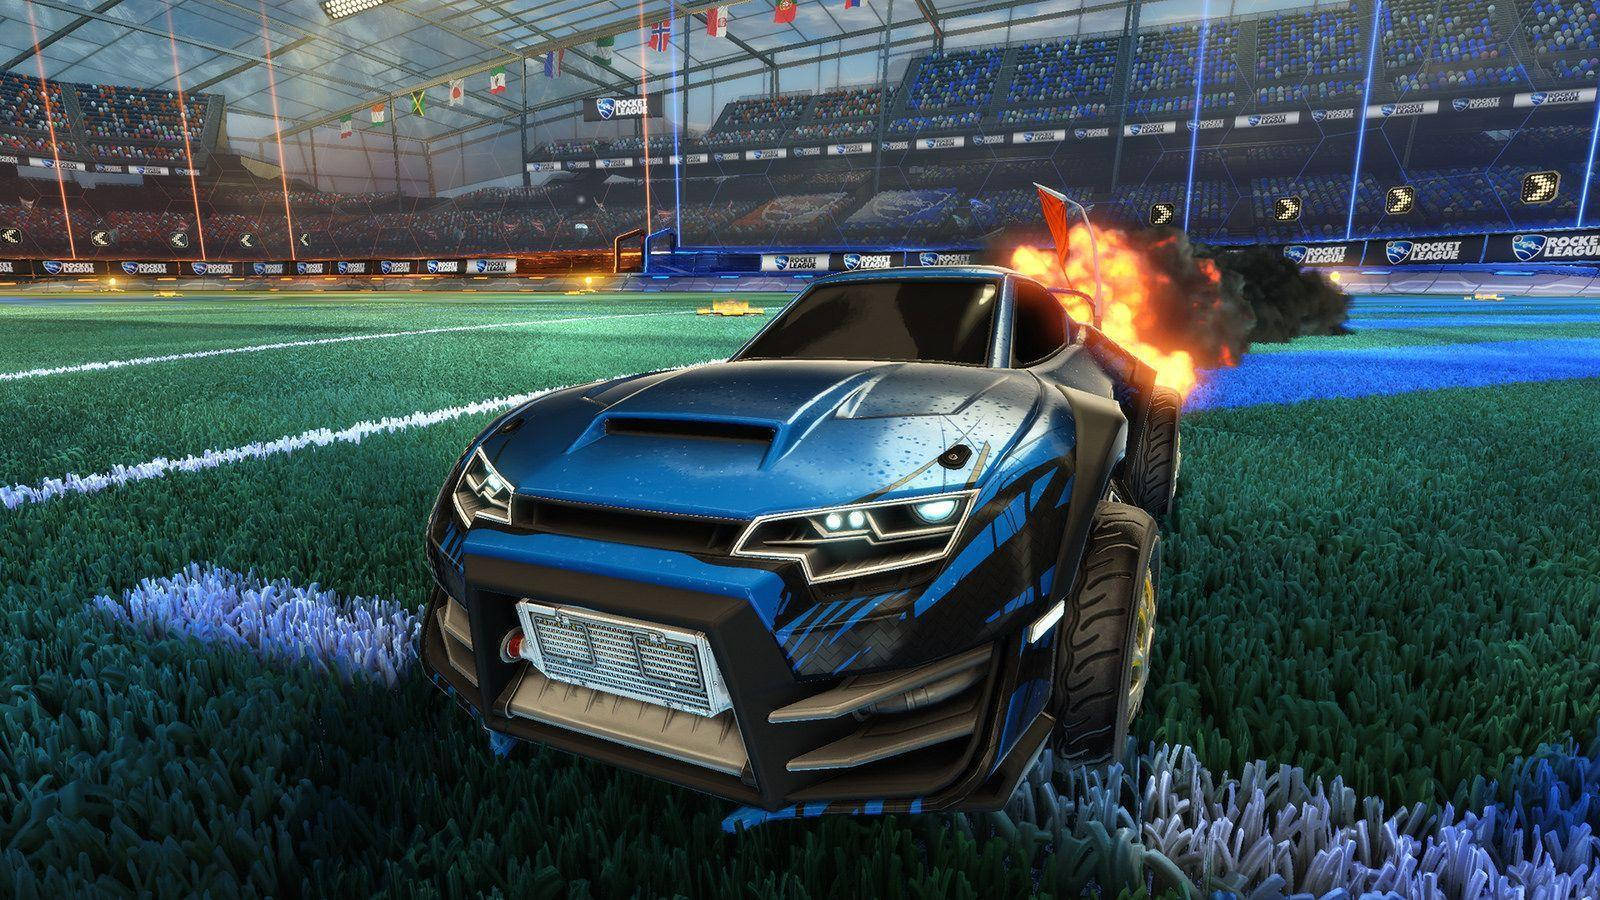 Rocket League 1600X900 Wallpaper and Background Image